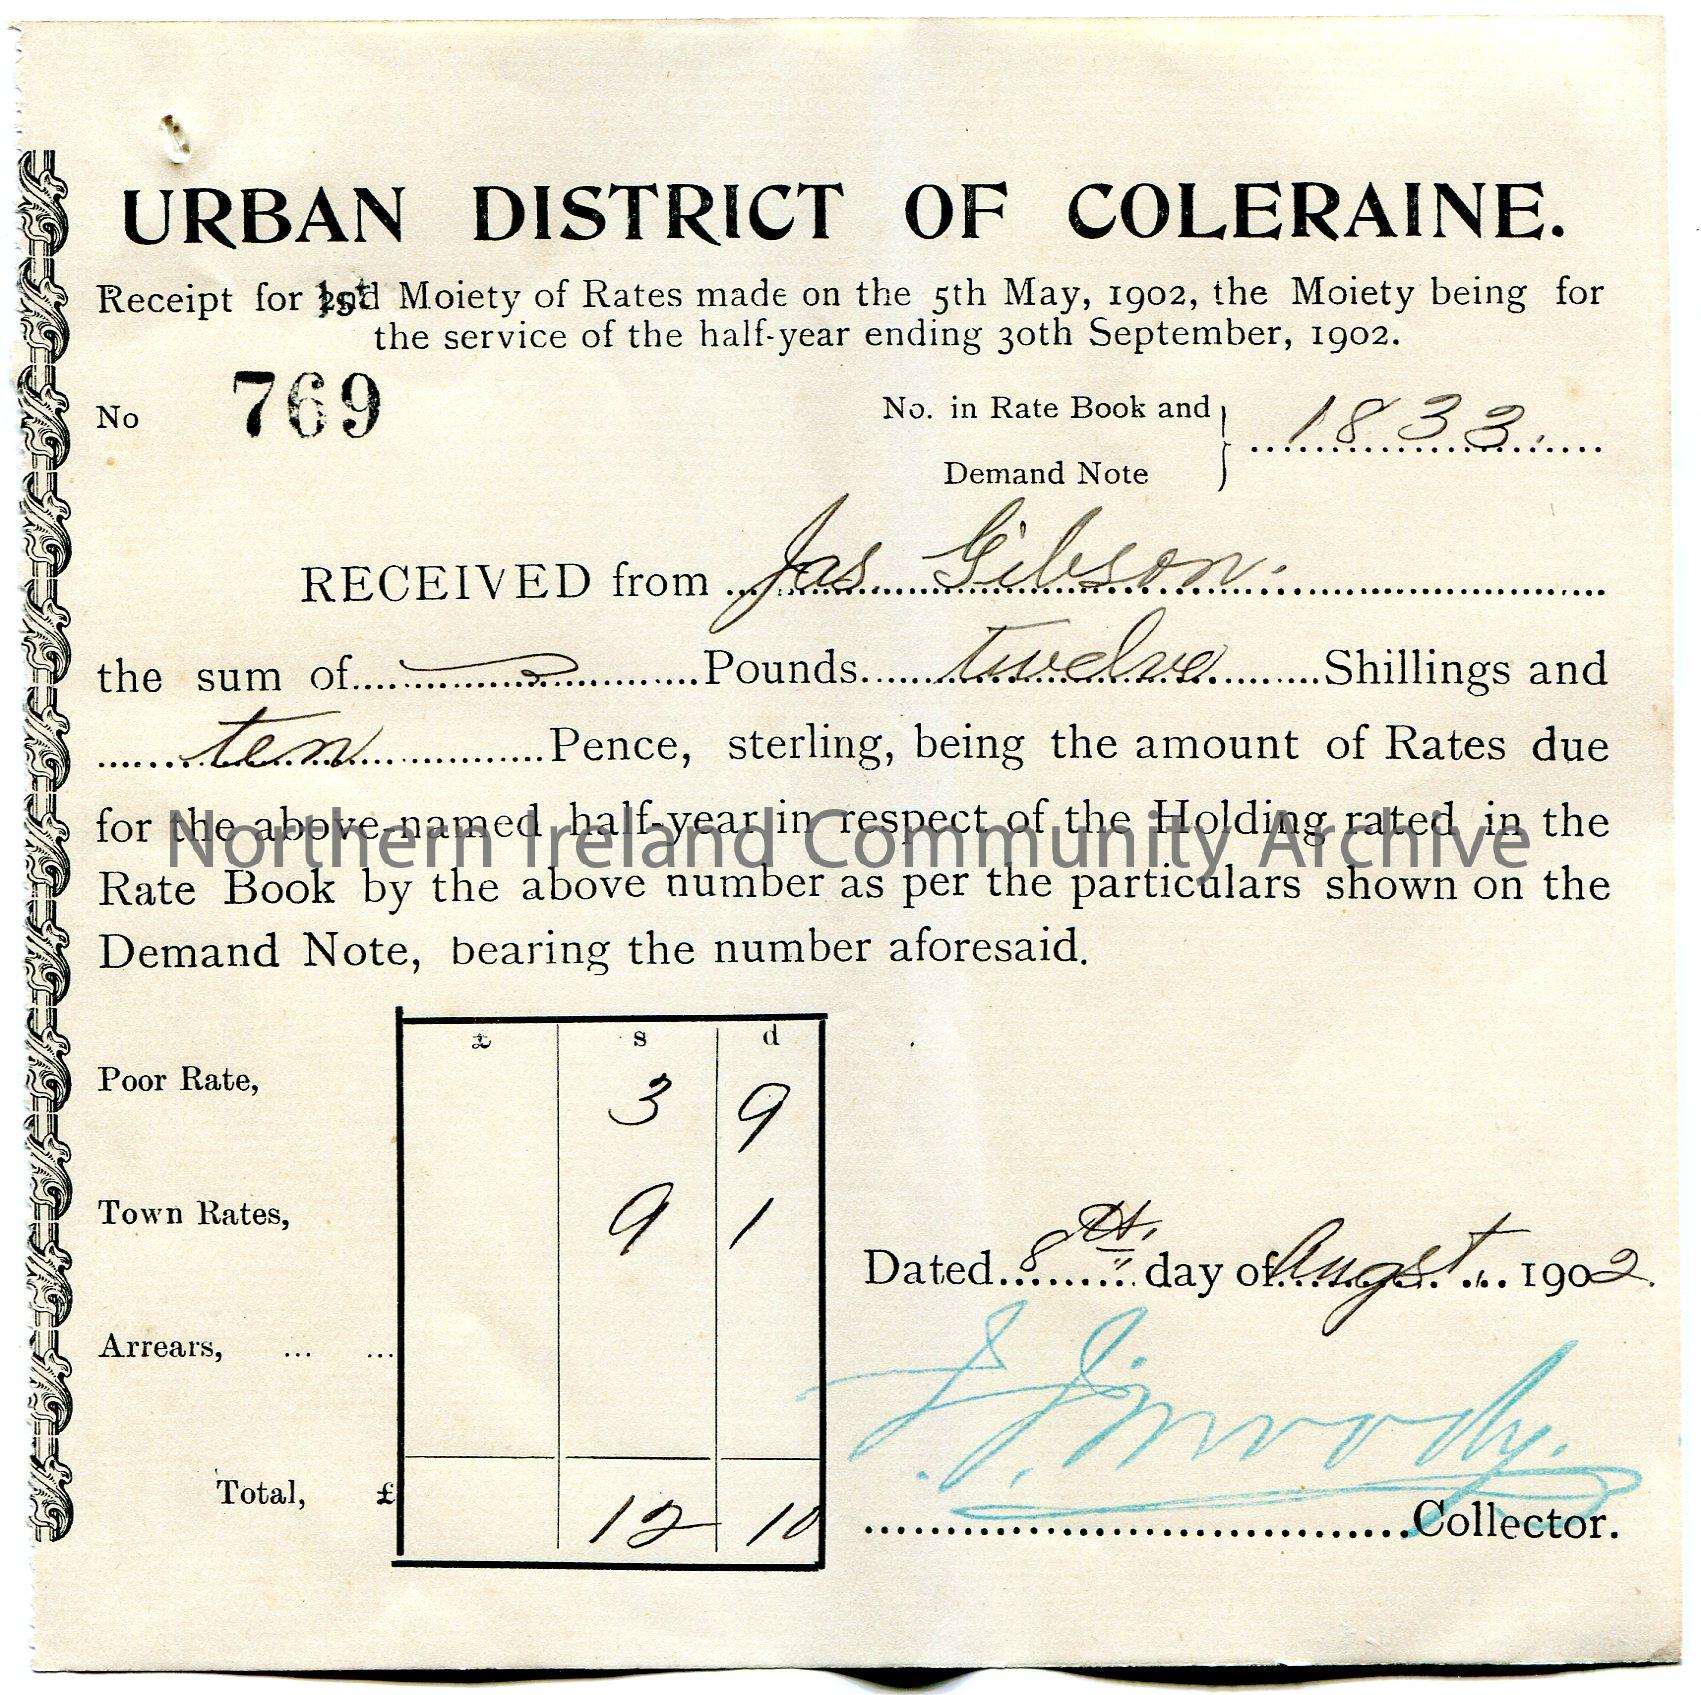 Printed and handwritten receipt for half year rates ending 30th September, 1902 for a property. Receipt no. 769. Issued by Urban District of Coleraine…